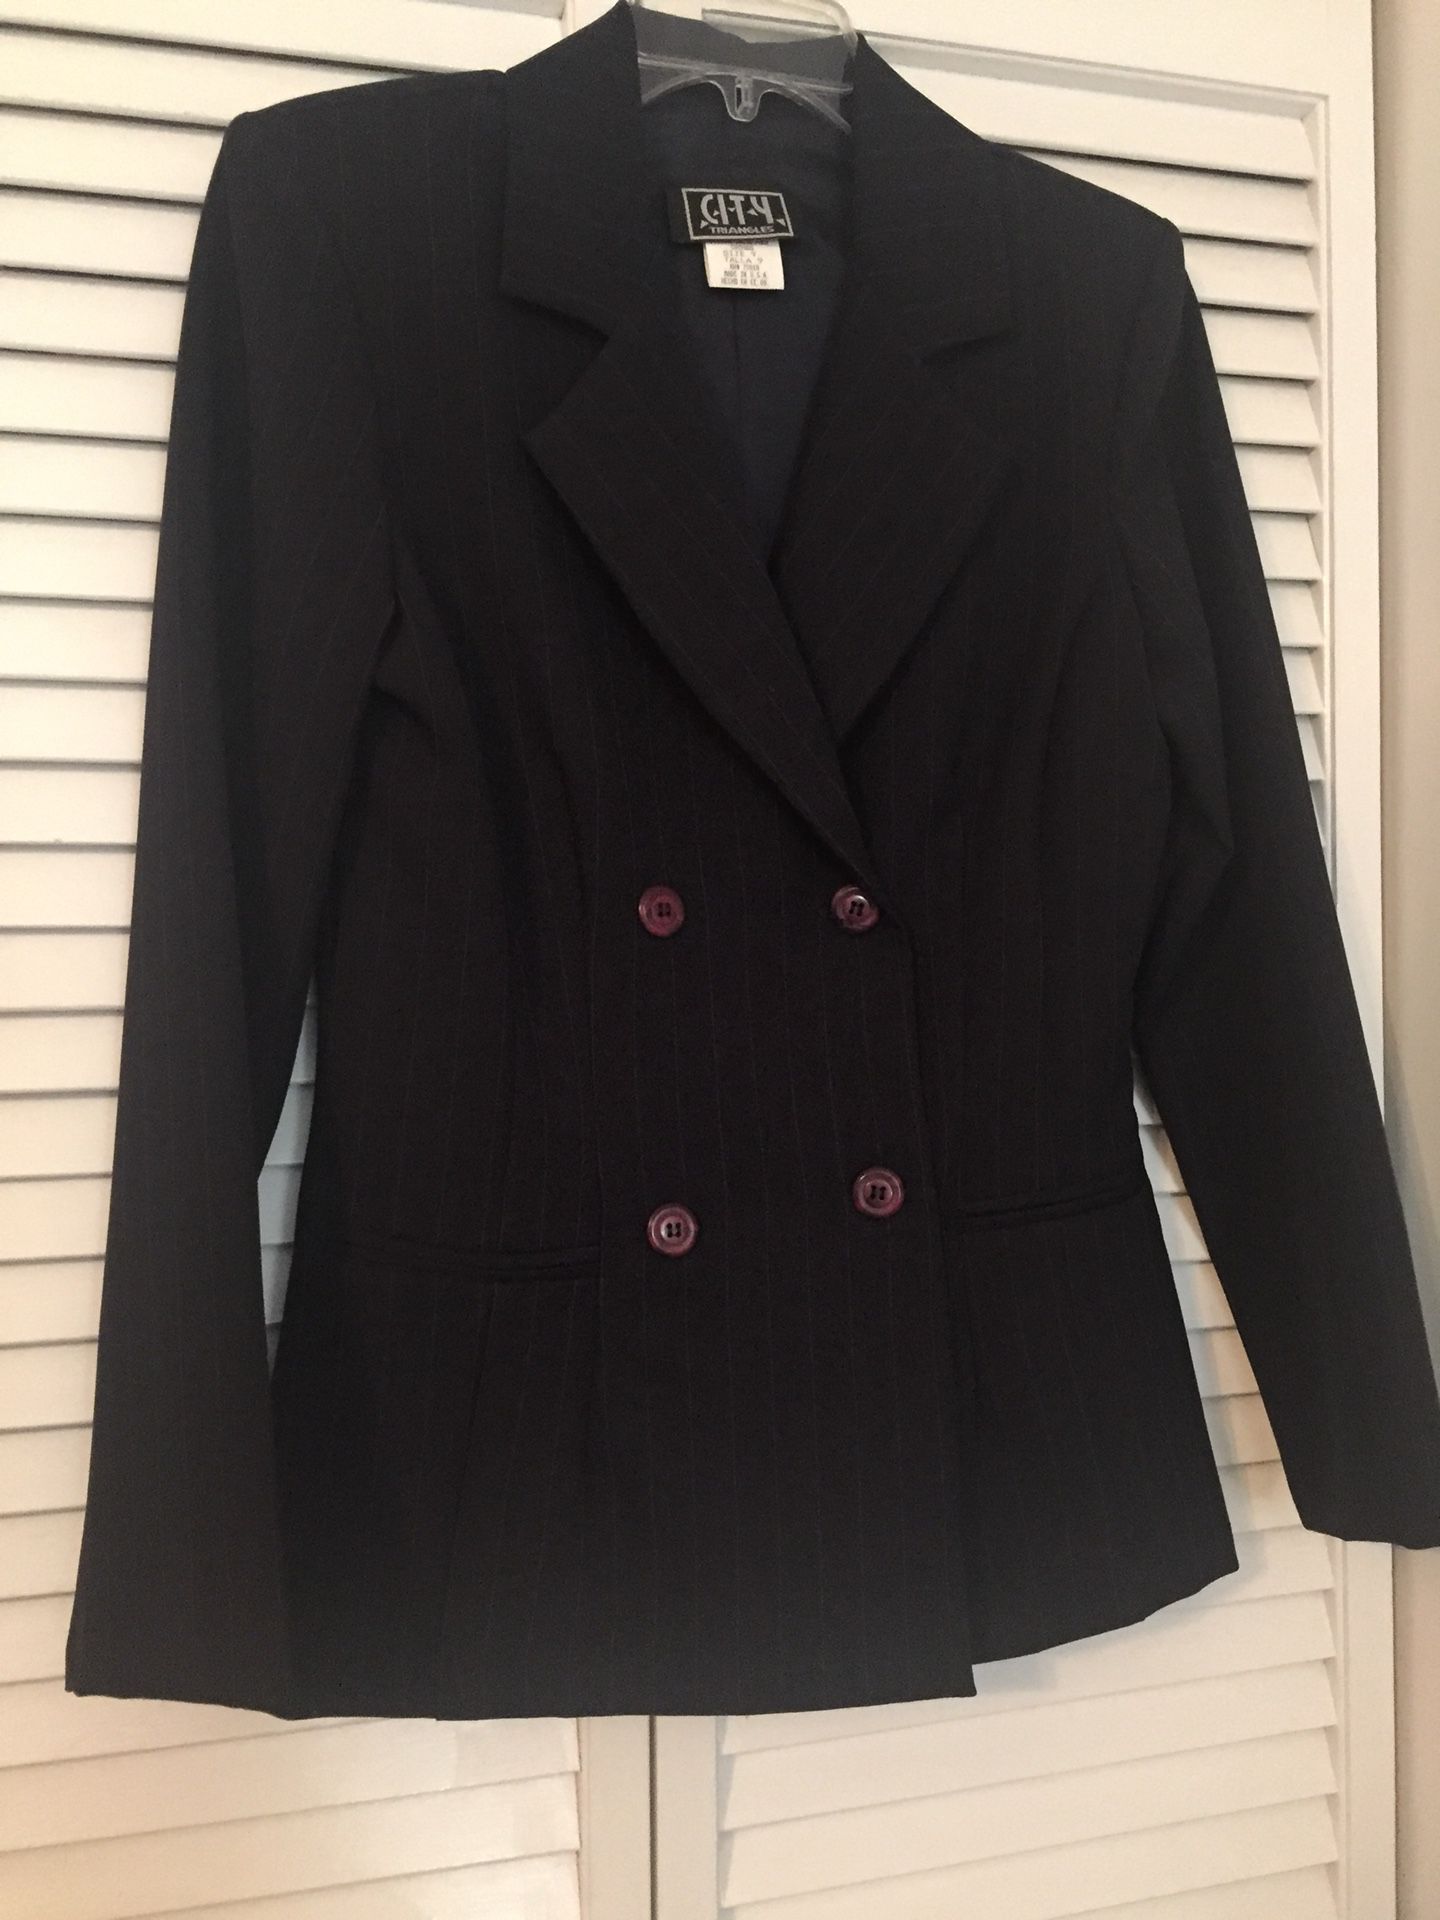 NWOT City Triangles Skirt Suit Size 9